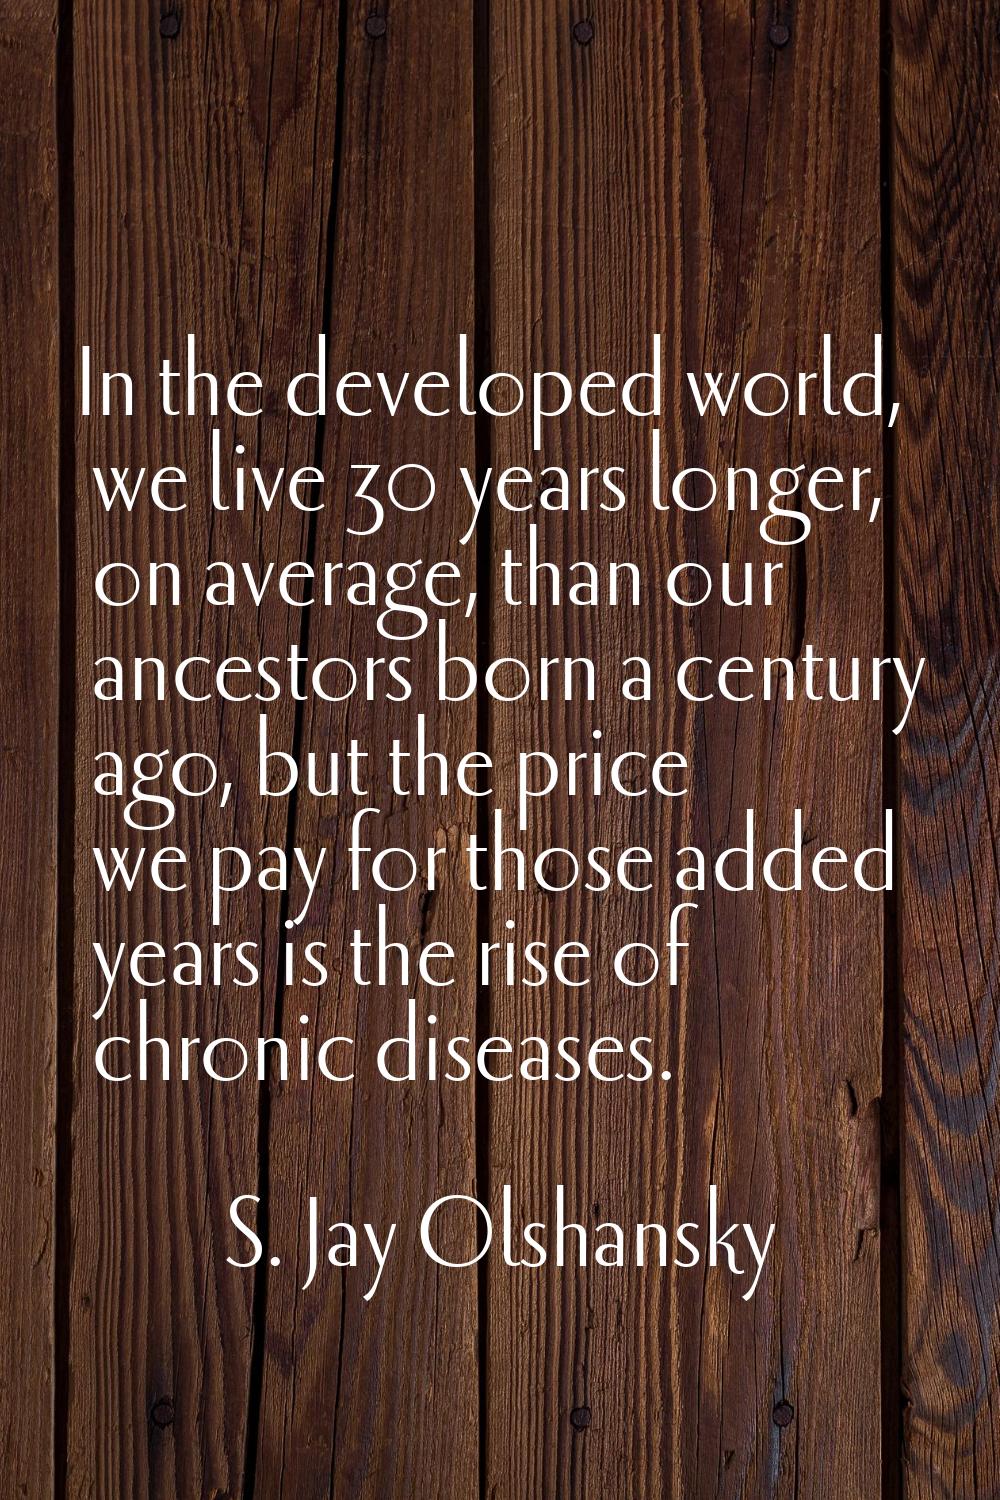 In the developed world, we live 30 years longer, on average, than our ancestors born a century ago,